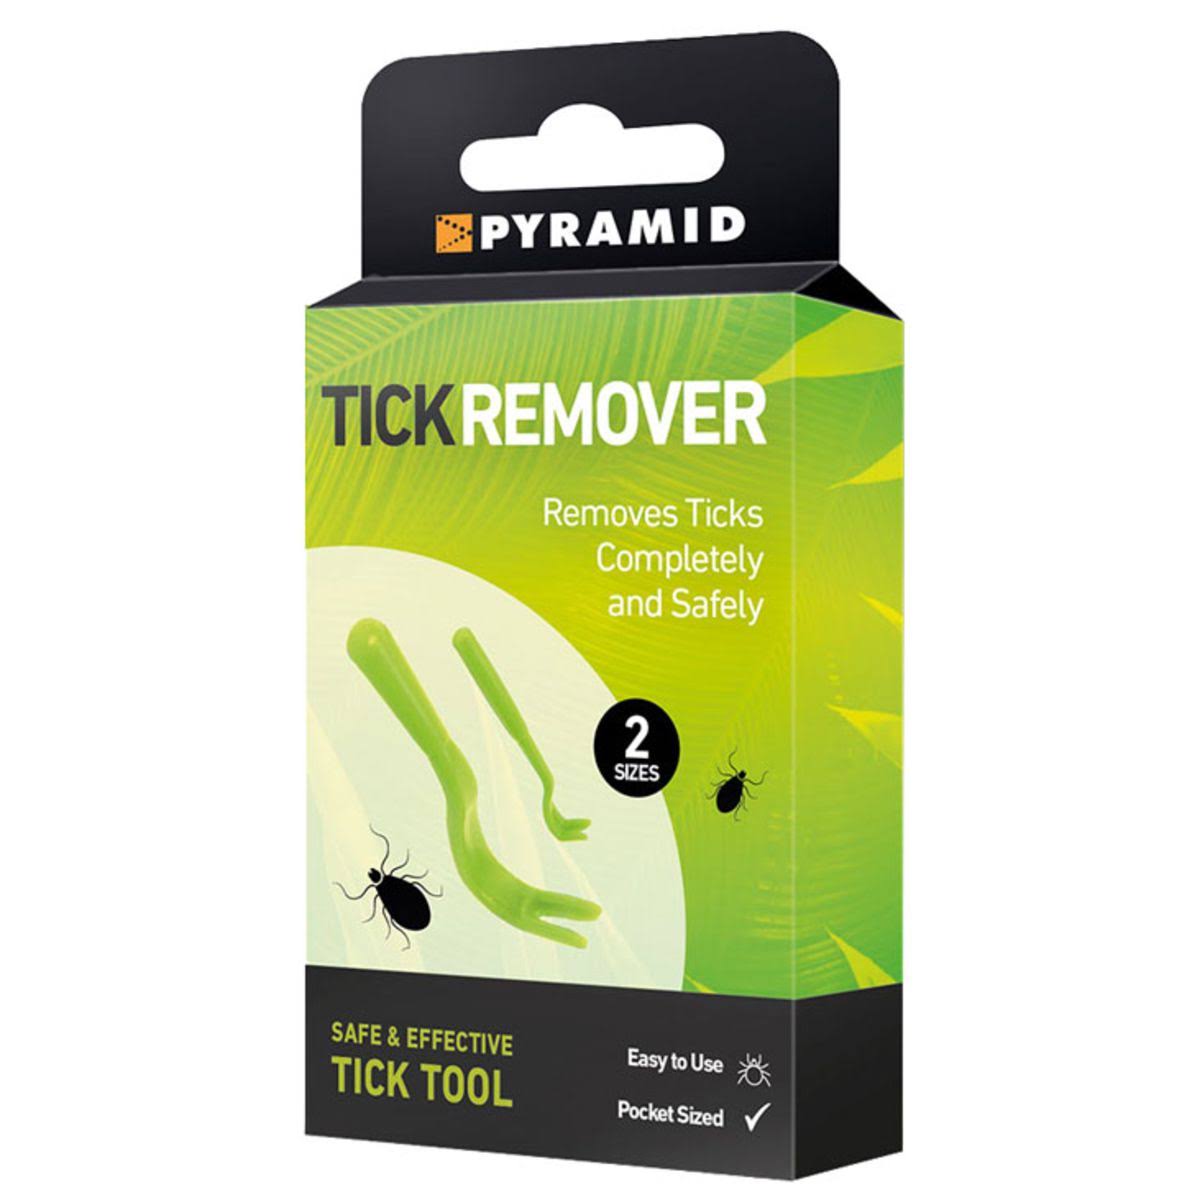 Pyramid Tick Remover Safe Easy Removal of Ticks for Humans, Dogs, Cats and Horses - 2 Sizes